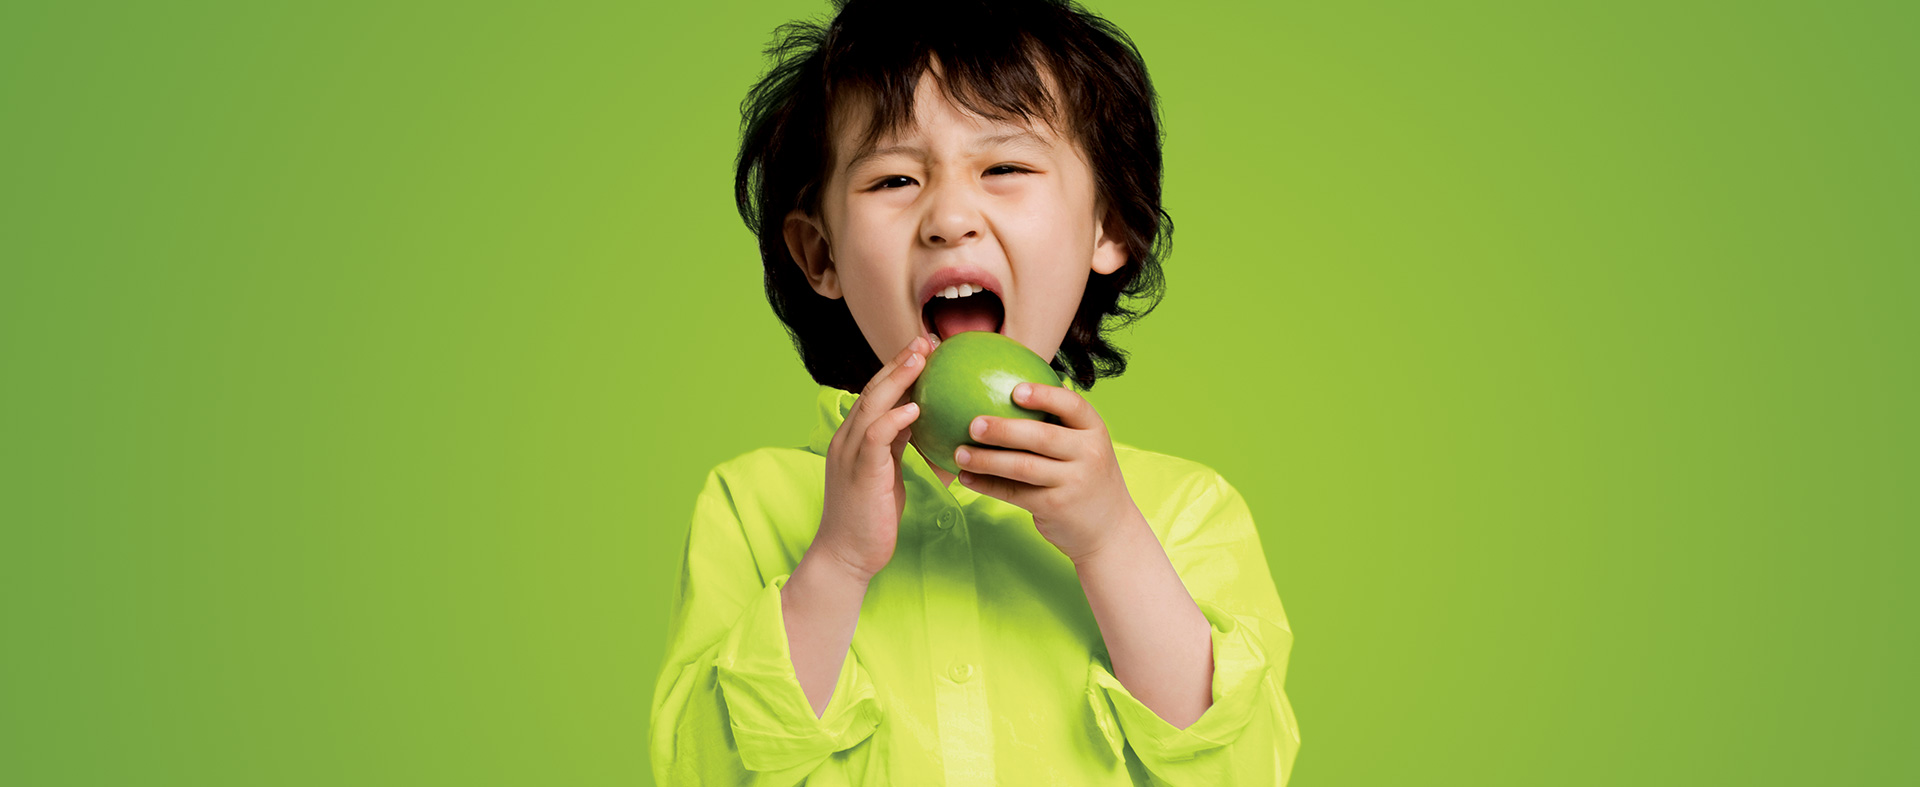 Young Boy with Green Apple